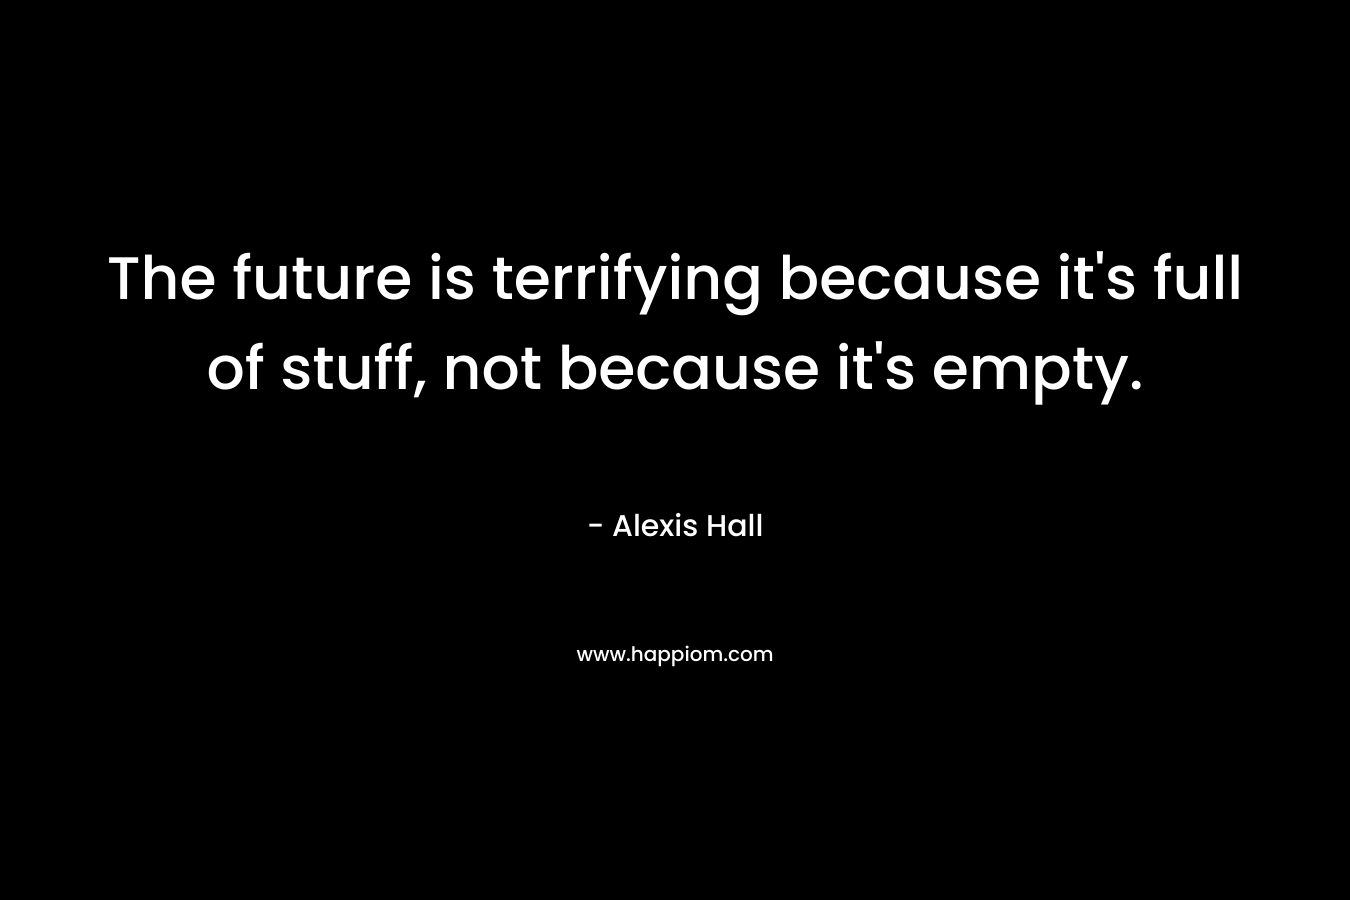 The future is terrifying because it's full of stuff, not because it's empty.